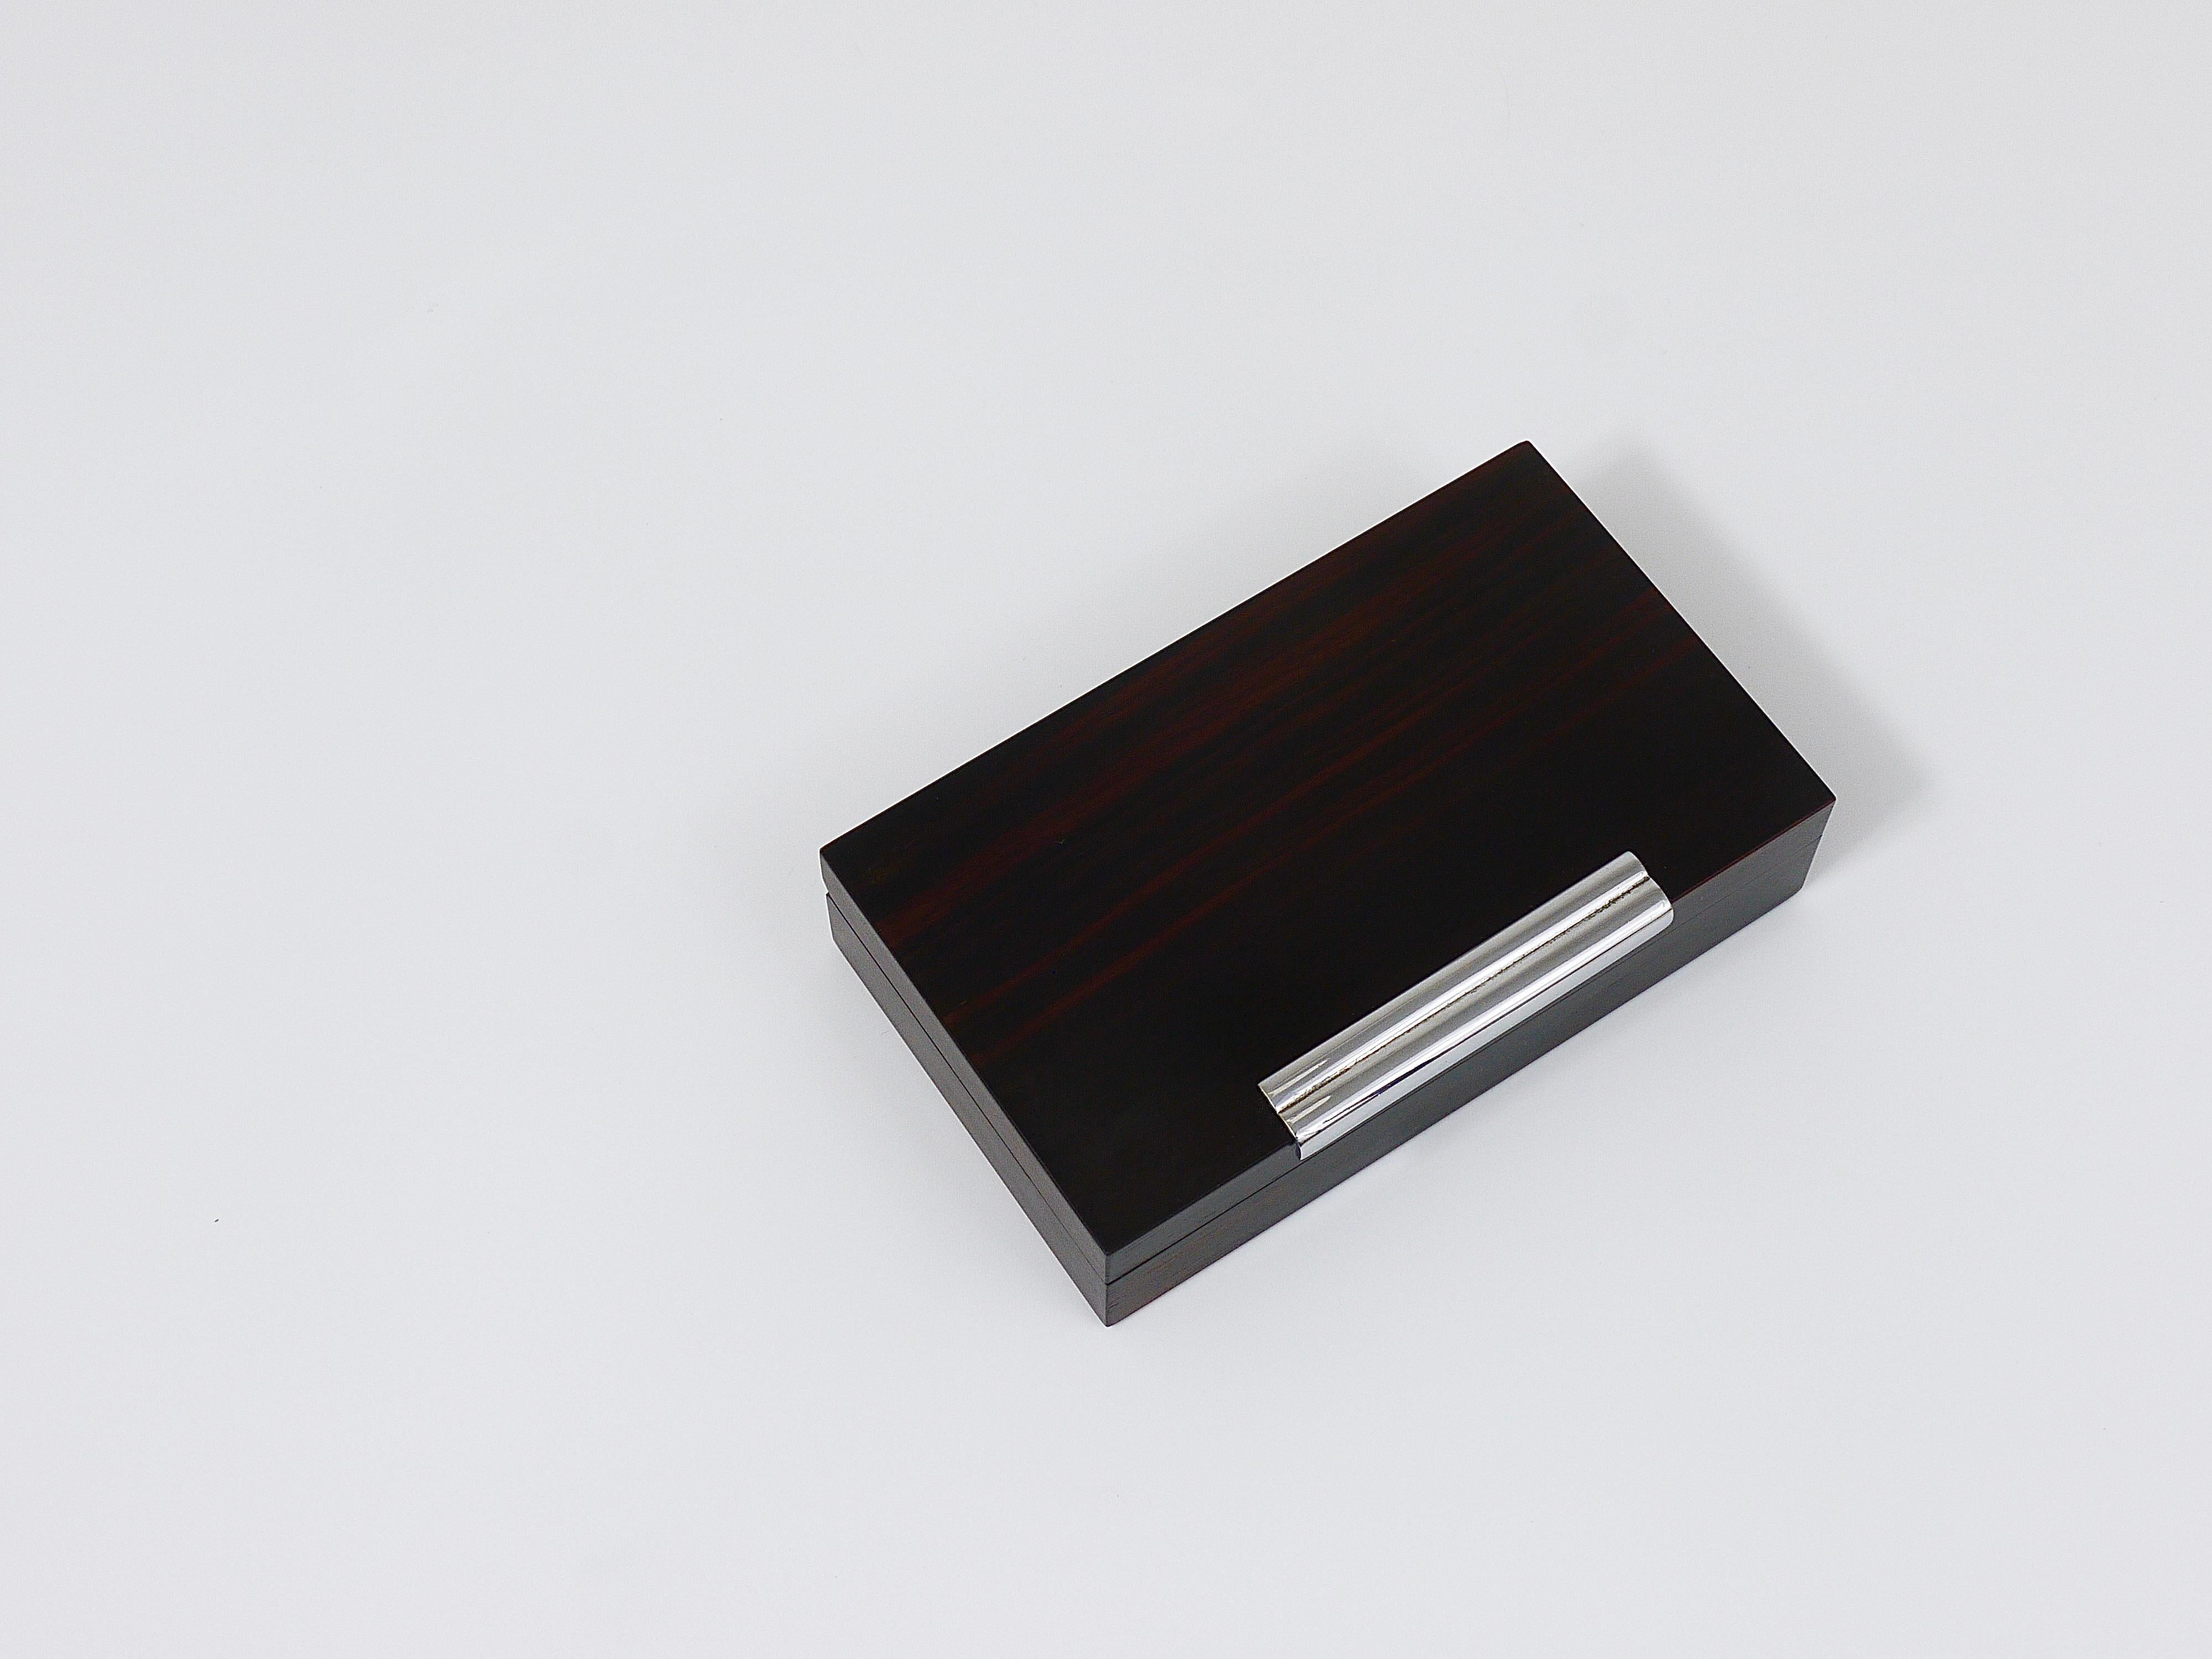 French Art Deco Rosewood & Nickel Storage Box, Maison Desny Style, France, 1930s For Sale 9